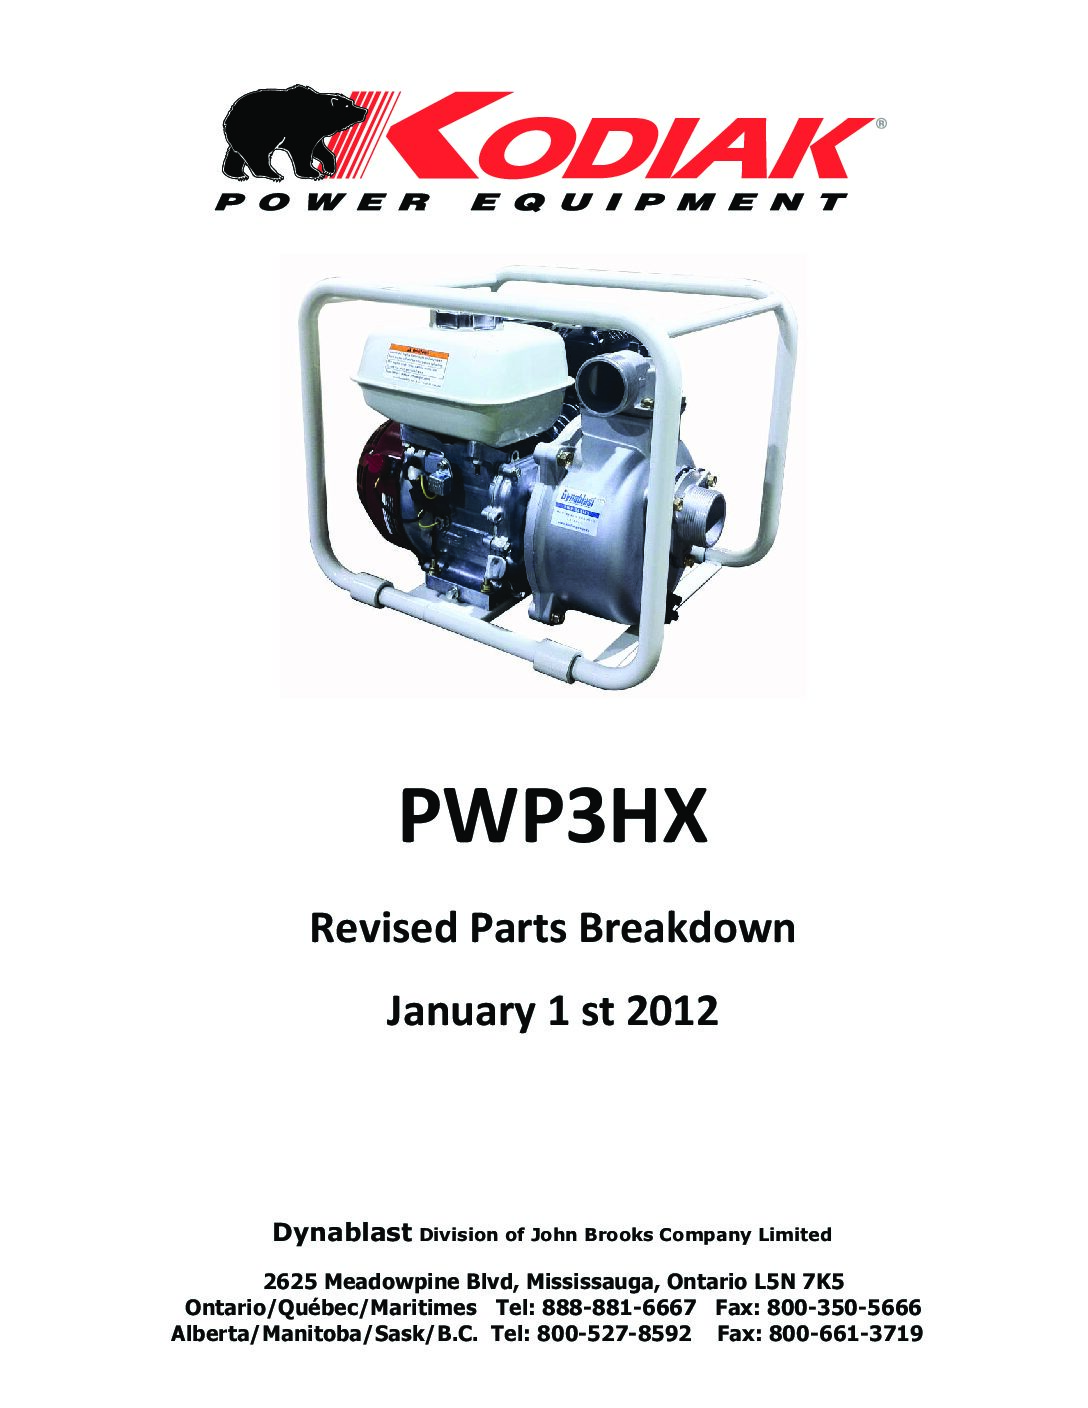 PWP3HX Parts Breakdown After January 2012